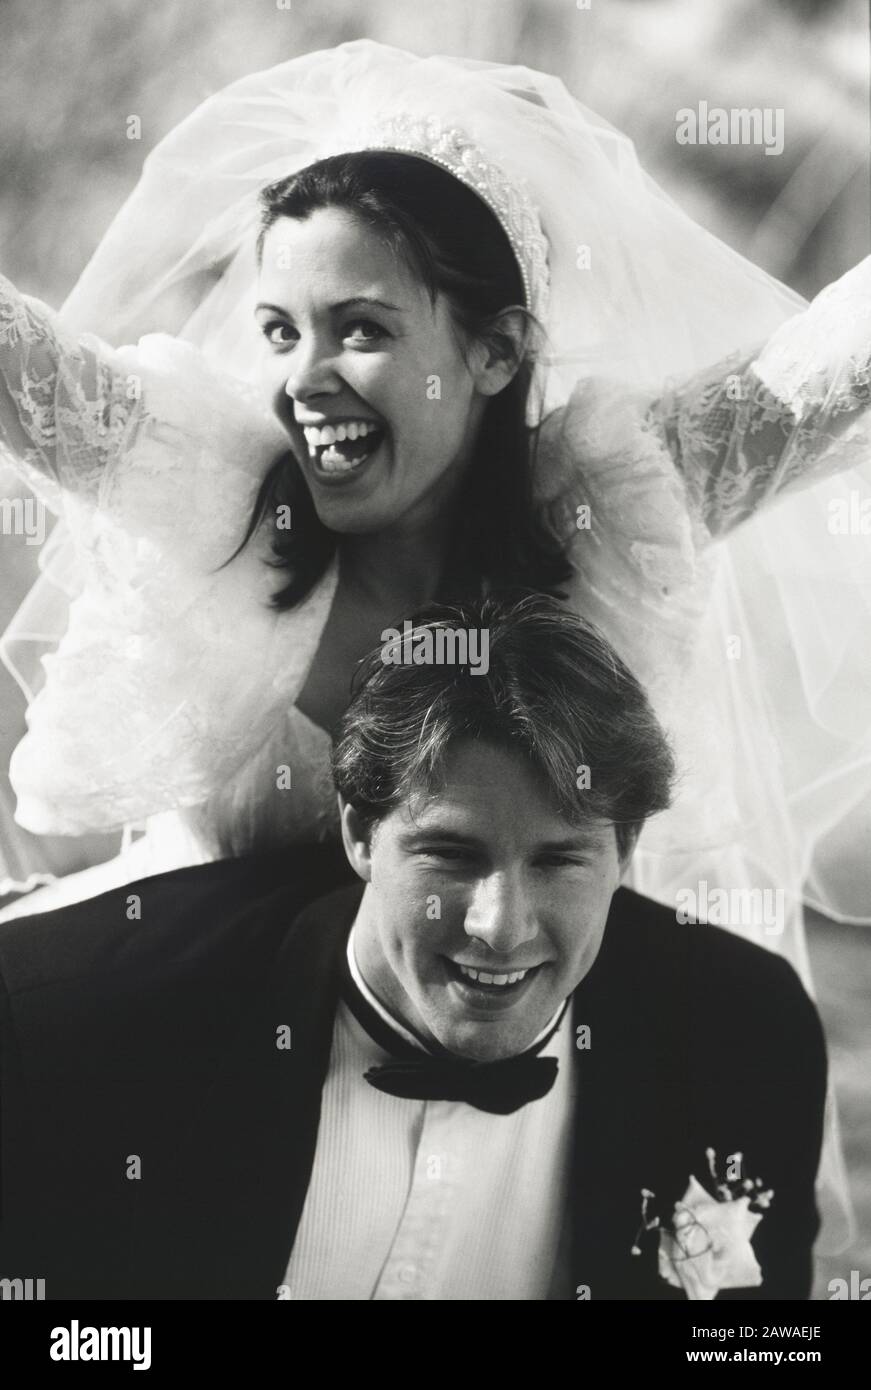 Black-and-white portrait of an excited bride and groom Stock Photo